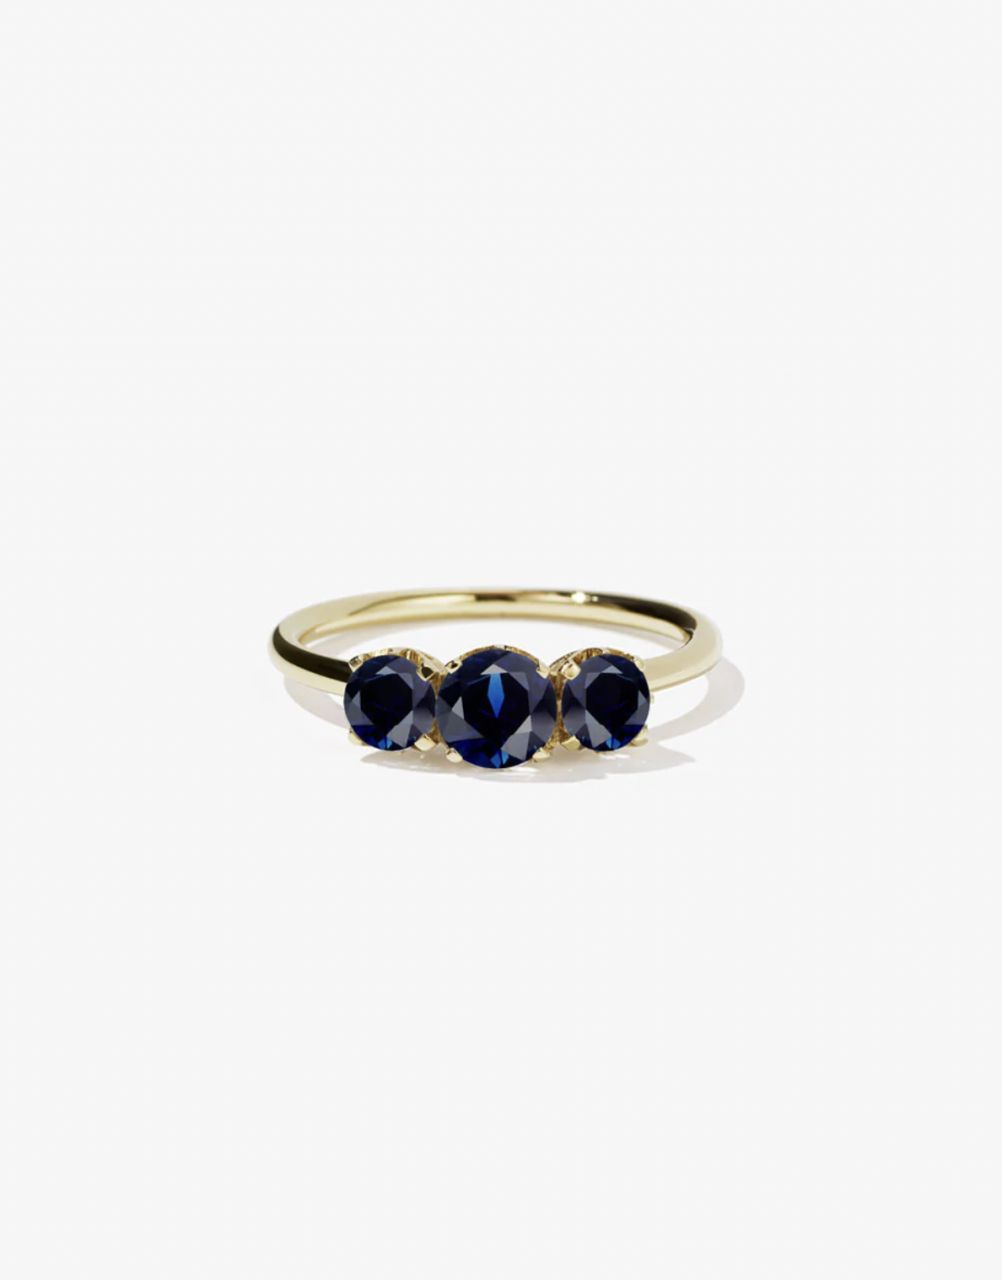 Meadowlark Signature 3 Stone Ring 9k Yellow Gold With Midnight Sapphires